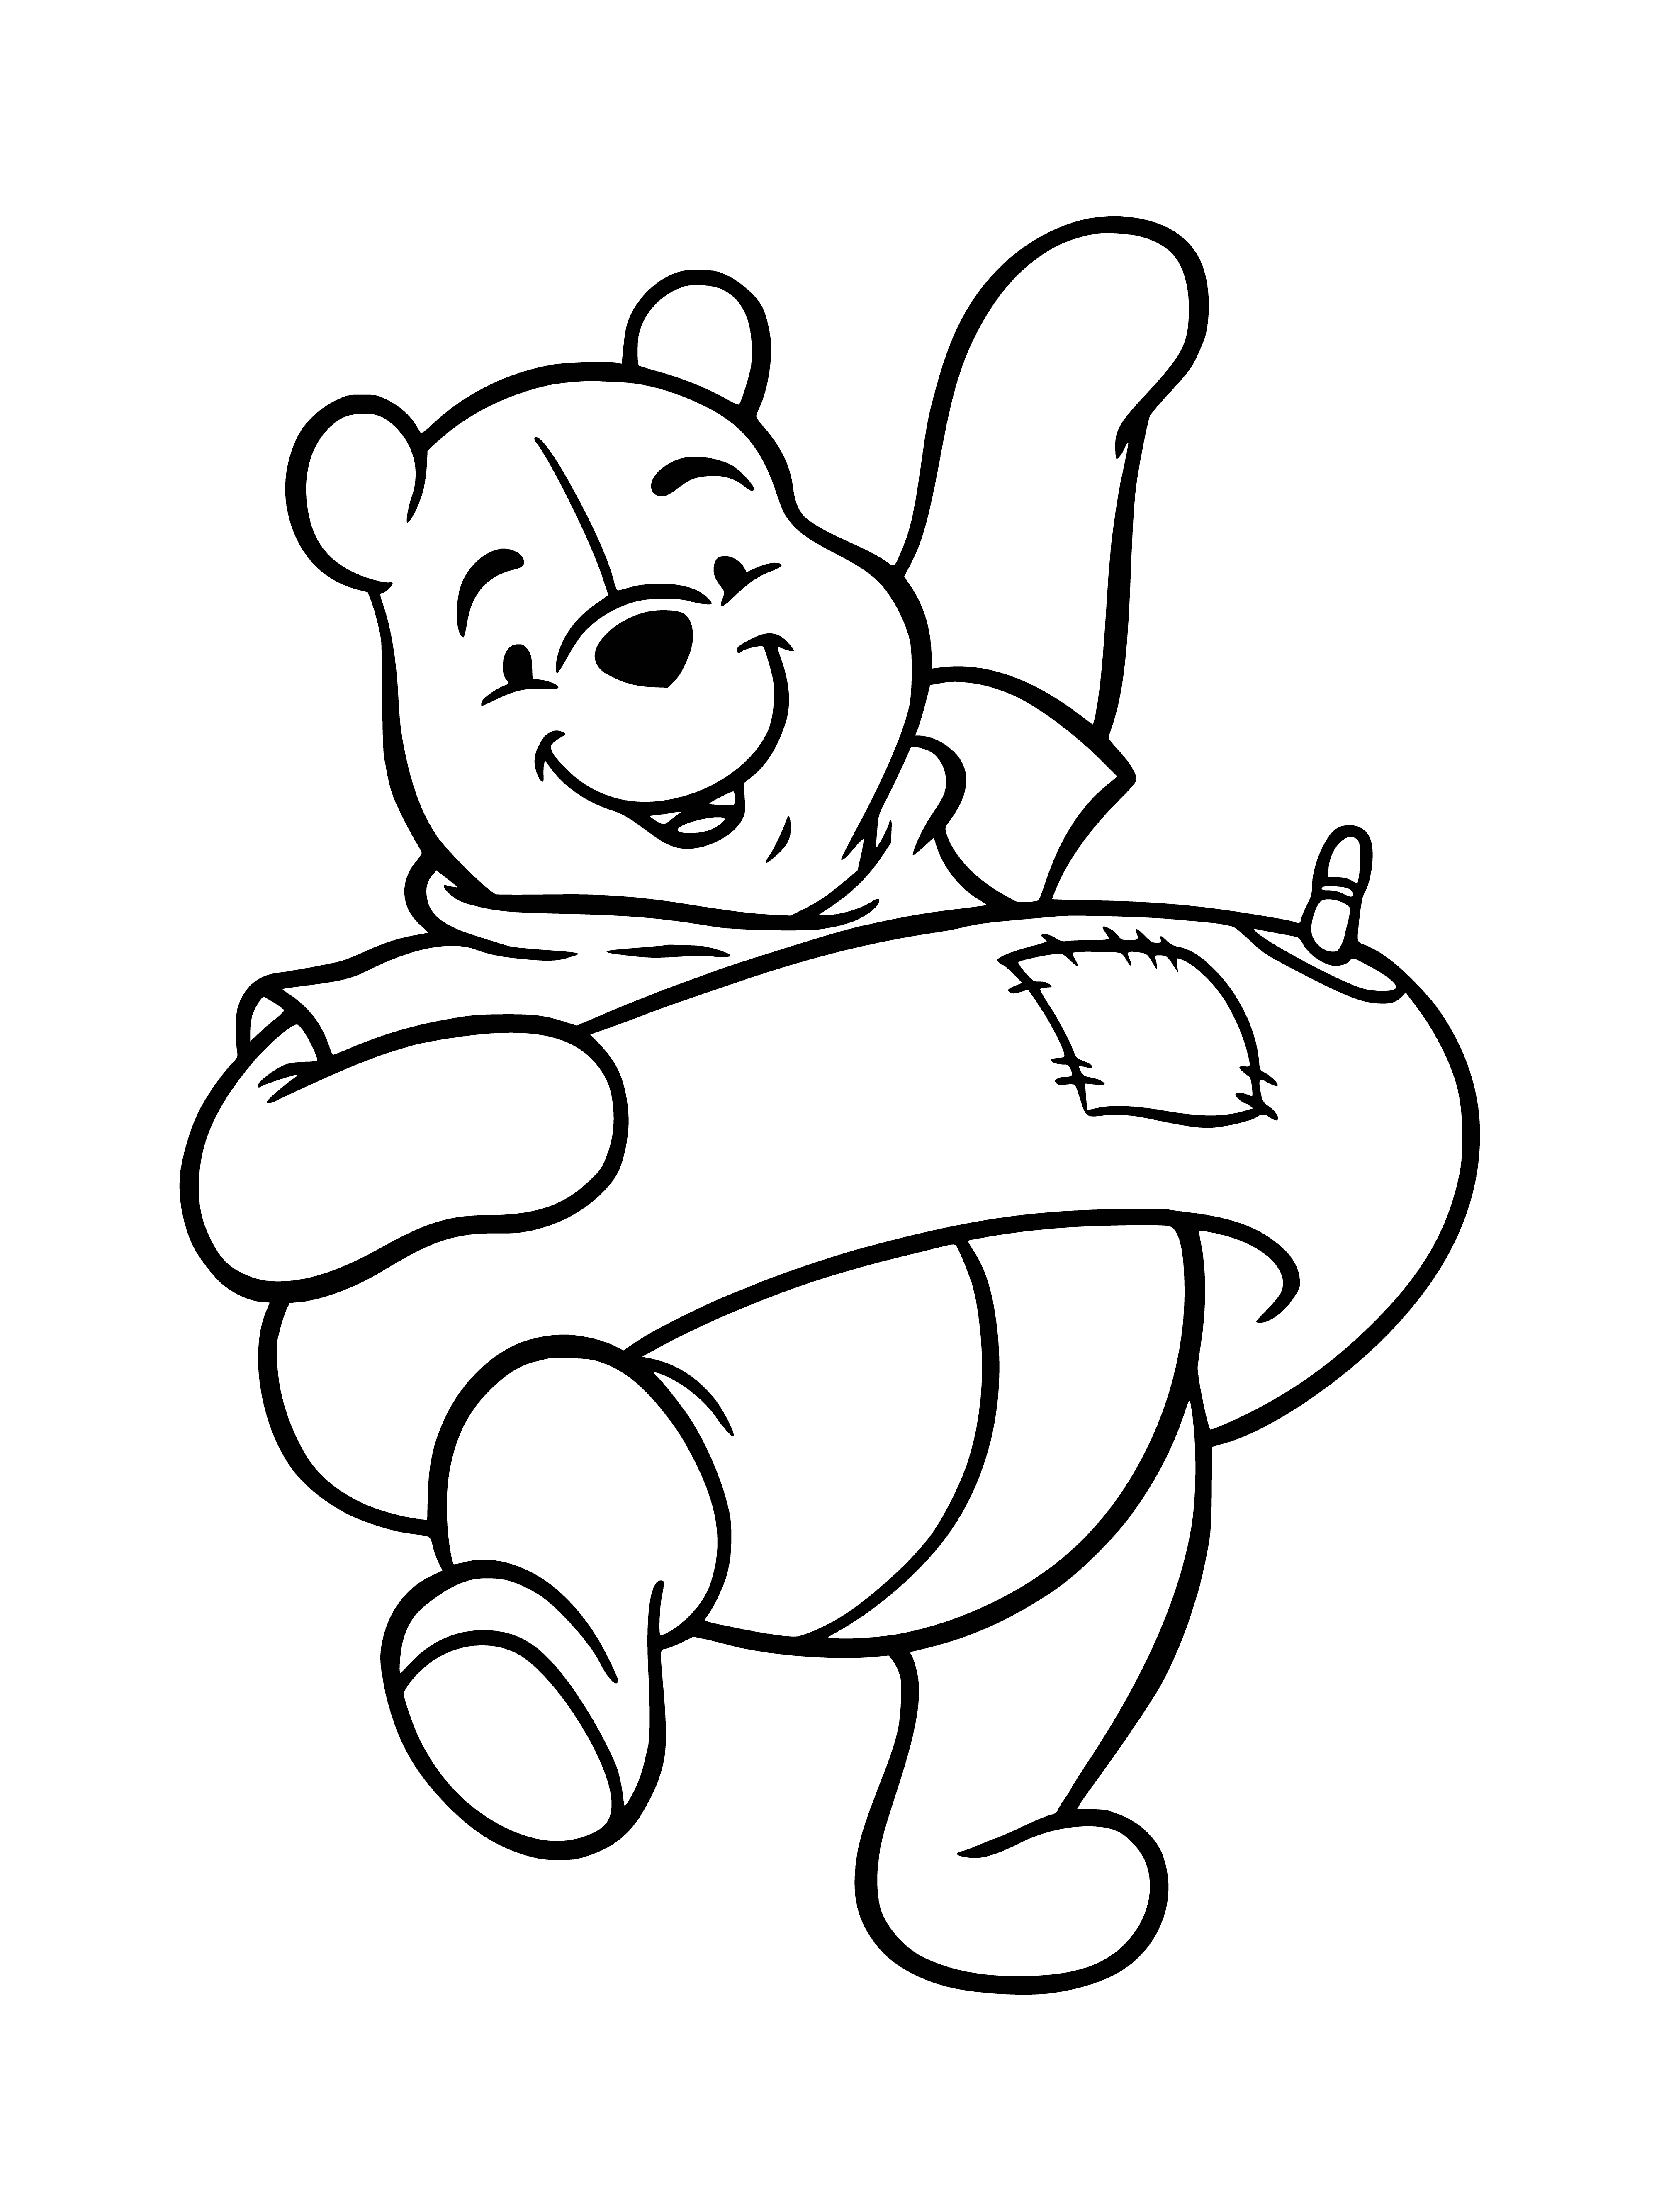 coloring page: Winnie the Bear goes swimming with a yellow umbrella & red/white towel, holding a beach ball and wearing blue/white striped swimsuit, green tree in background.